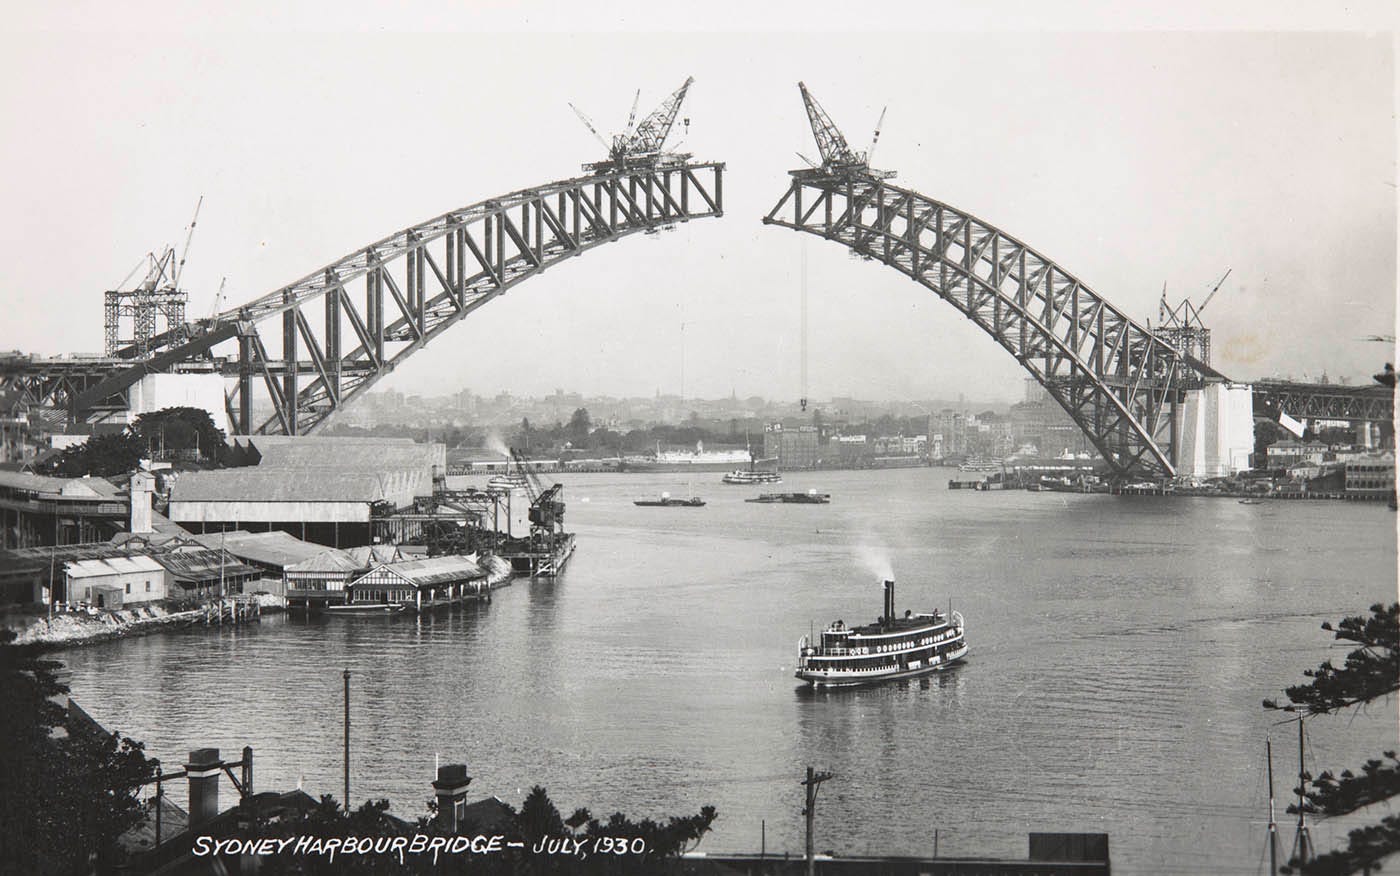 Photo taken from the north shore showing the two sides of the arch under construction. They have yet to meet. Large cranes are perched on top of each end of the spans. A ferry can be seen in the foreground.